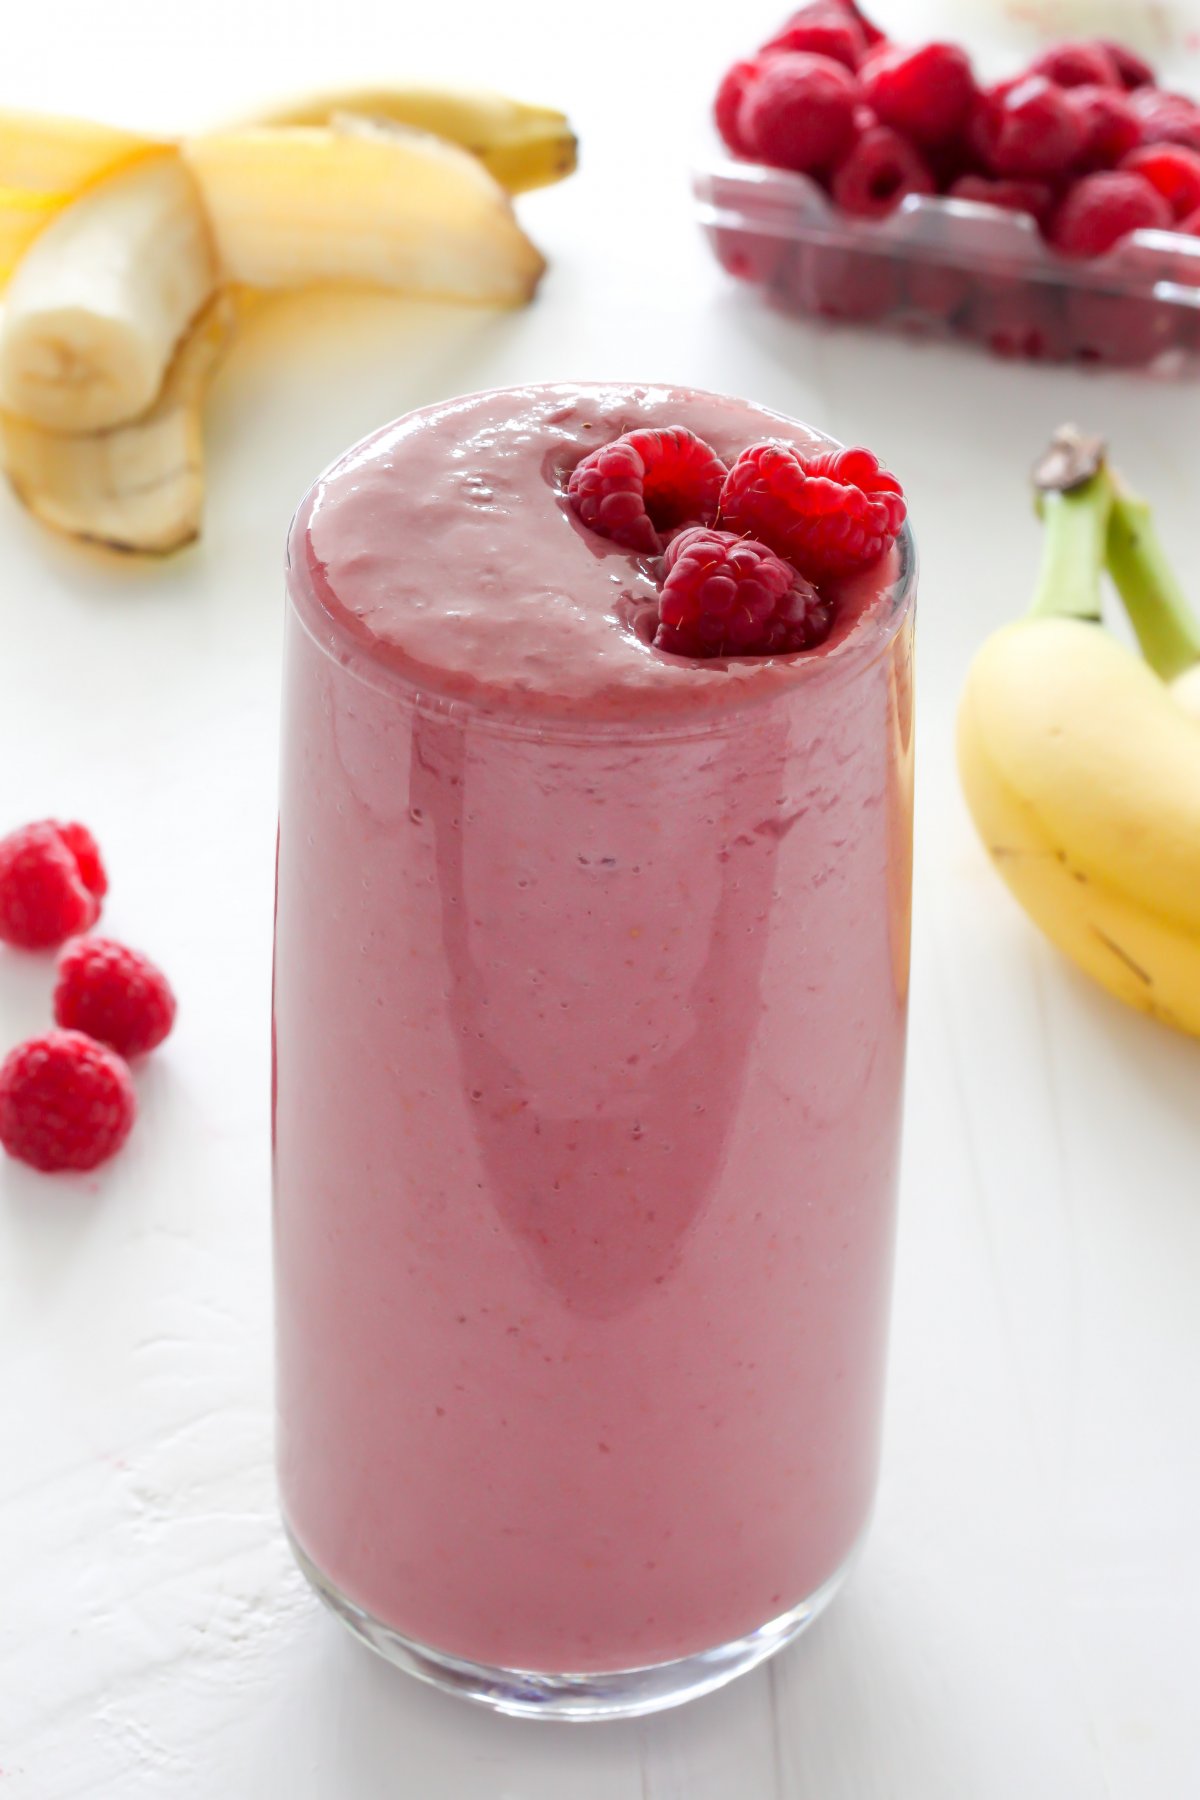 Raspberry Banana Smoothie - Baker by Nature